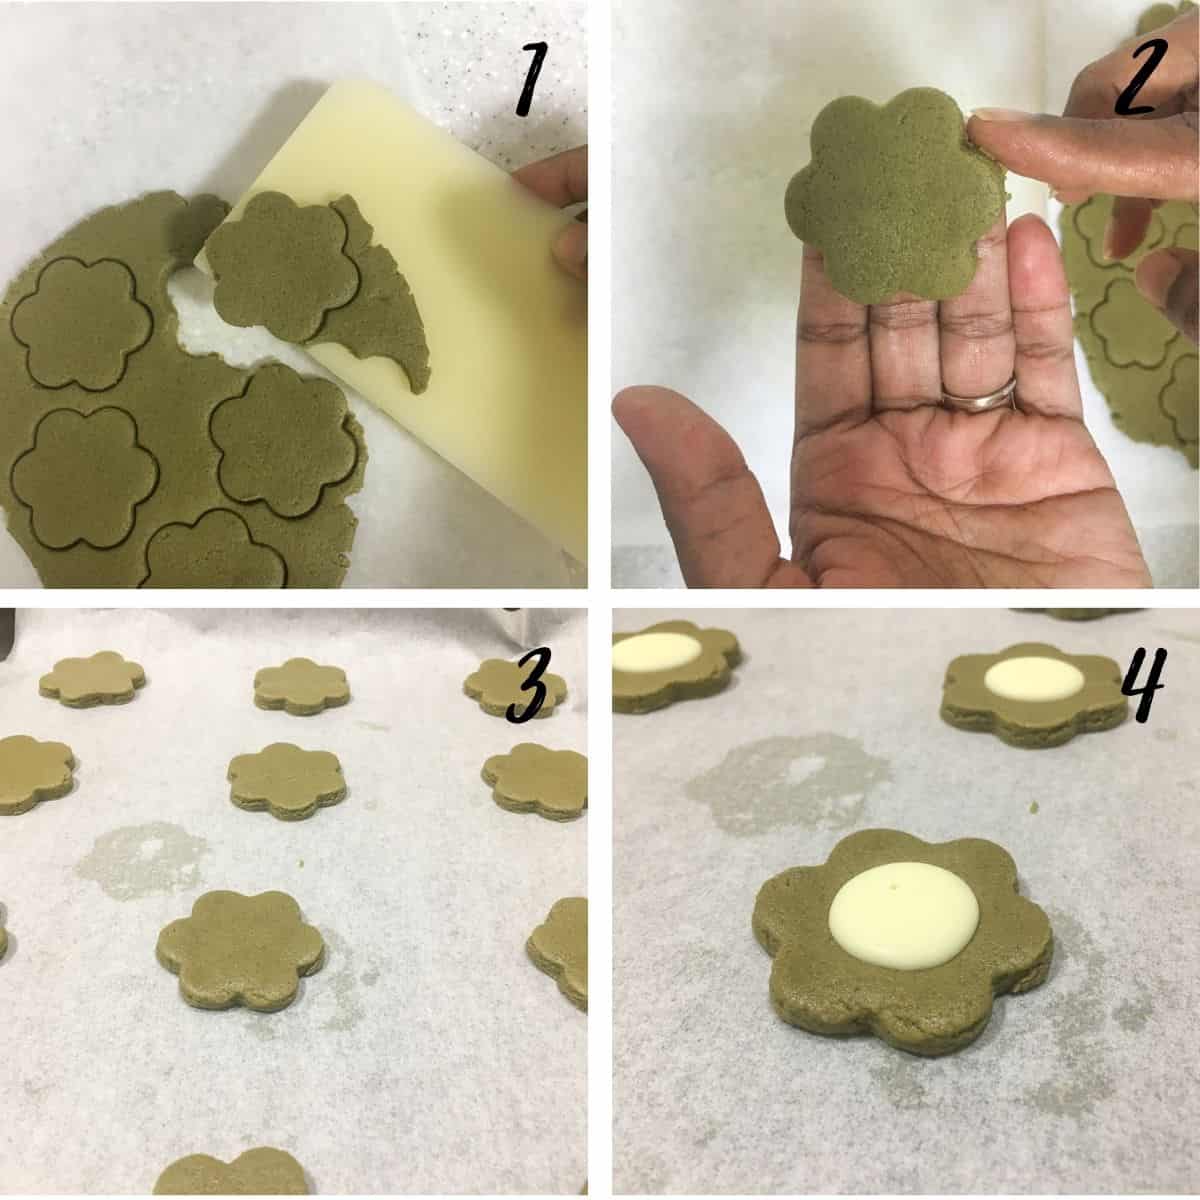 A poster of 4 images showing how to cut out flower shaped dough, how to place them on a baking tray and how to add white chocolate button centers.